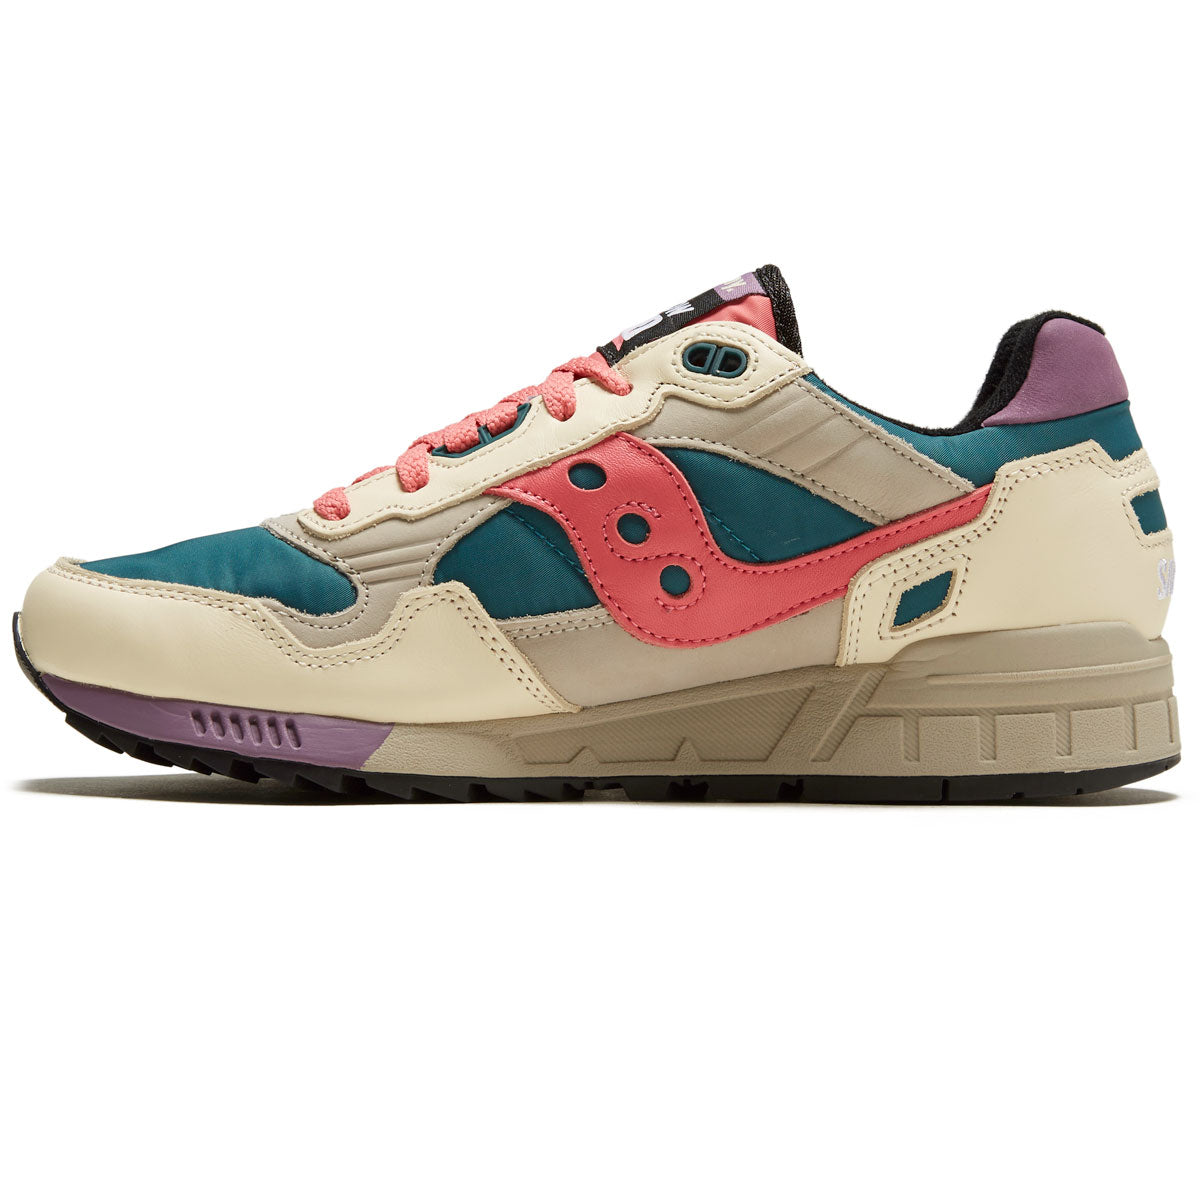 Saucony Shadow 5000 Shoes - Yellow/Green image 2